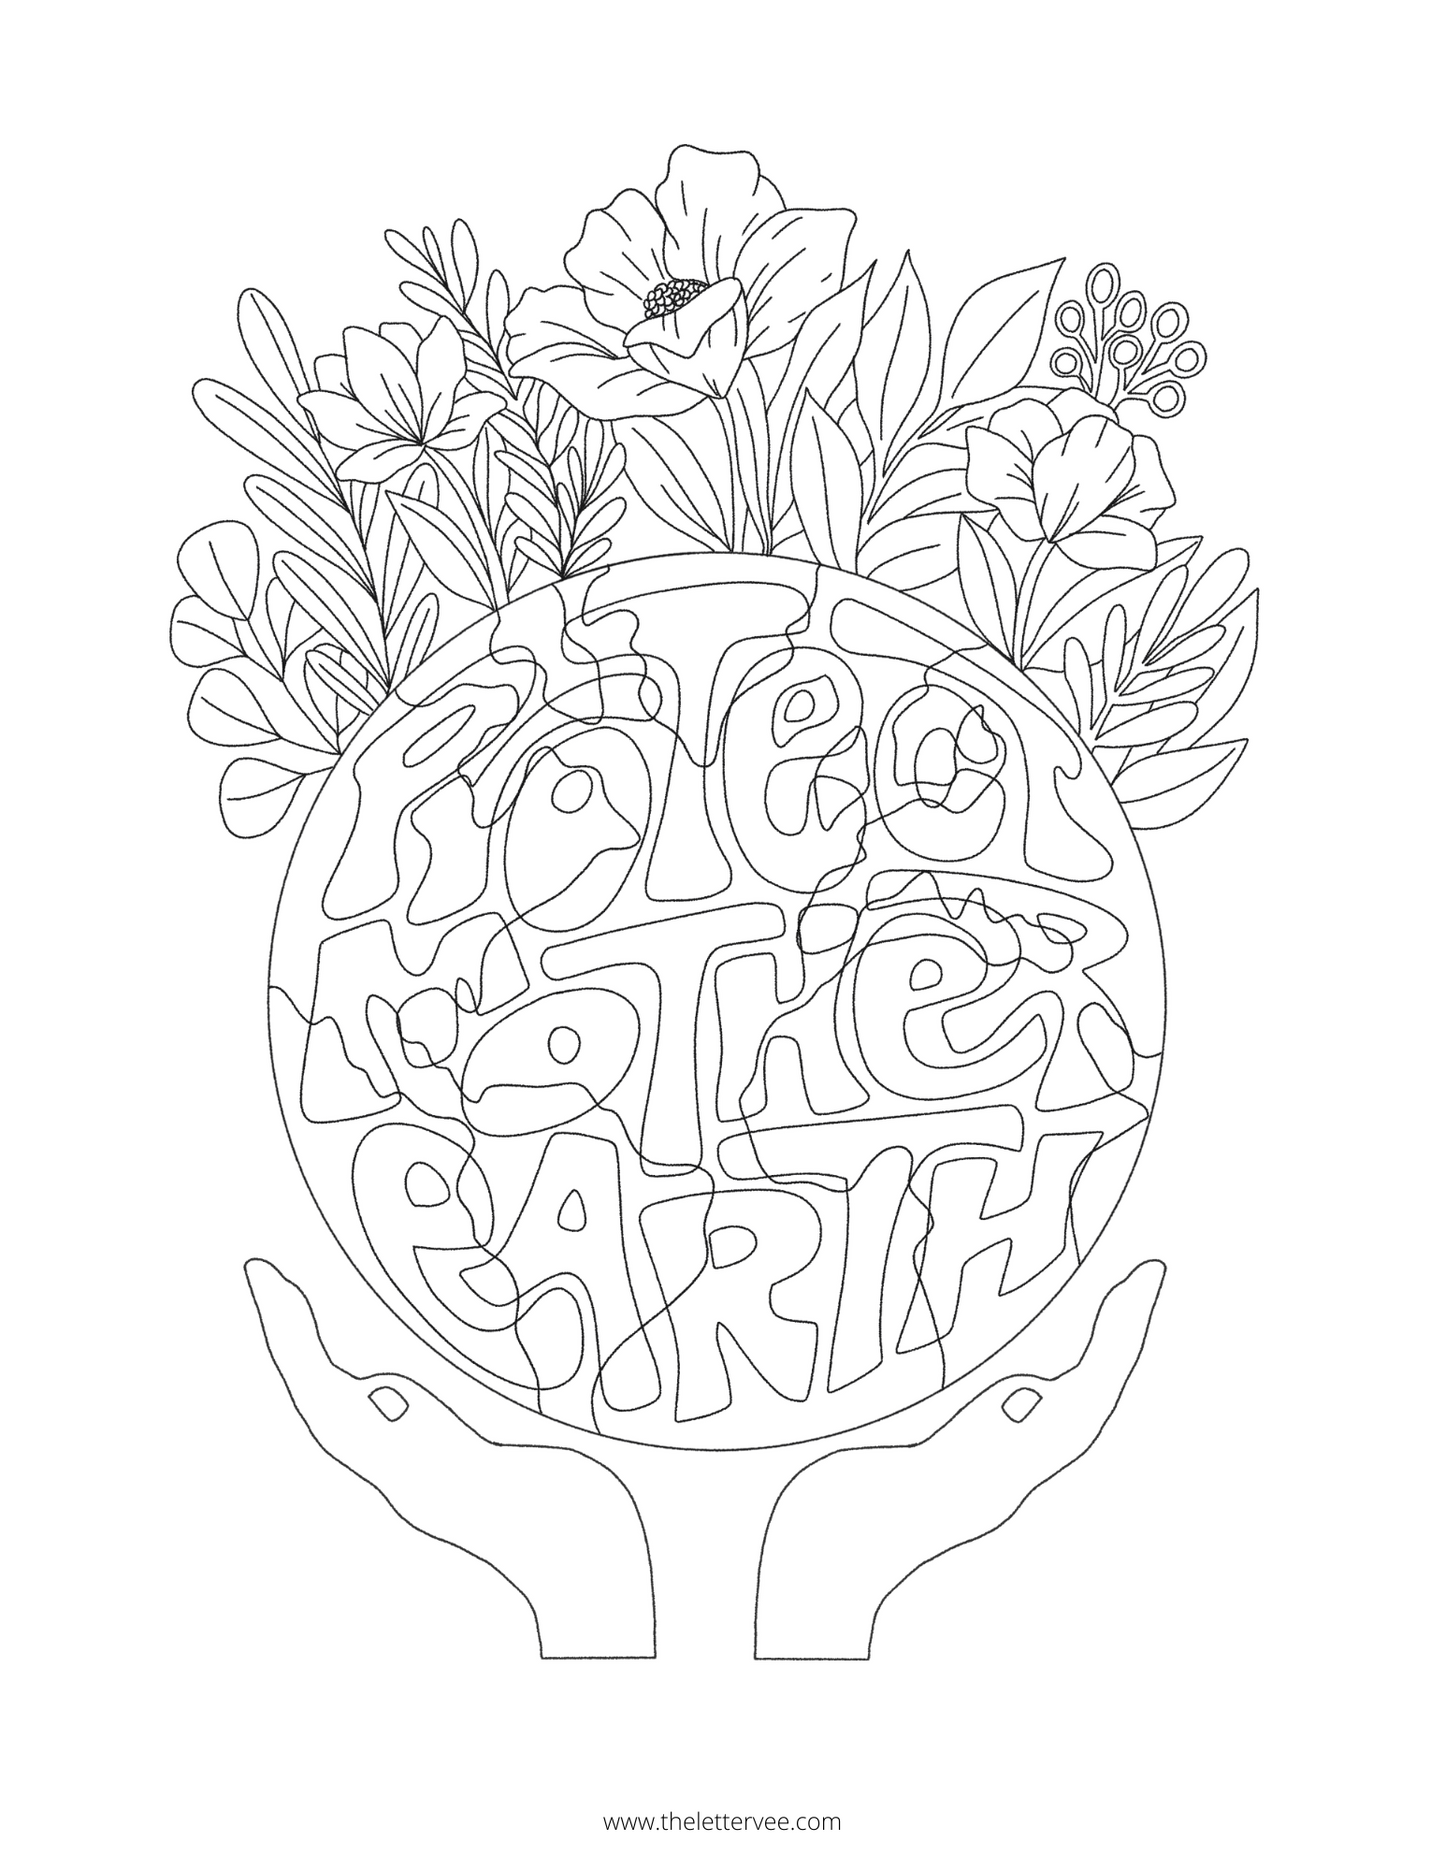 Protect Mother Earth | Coloring Page